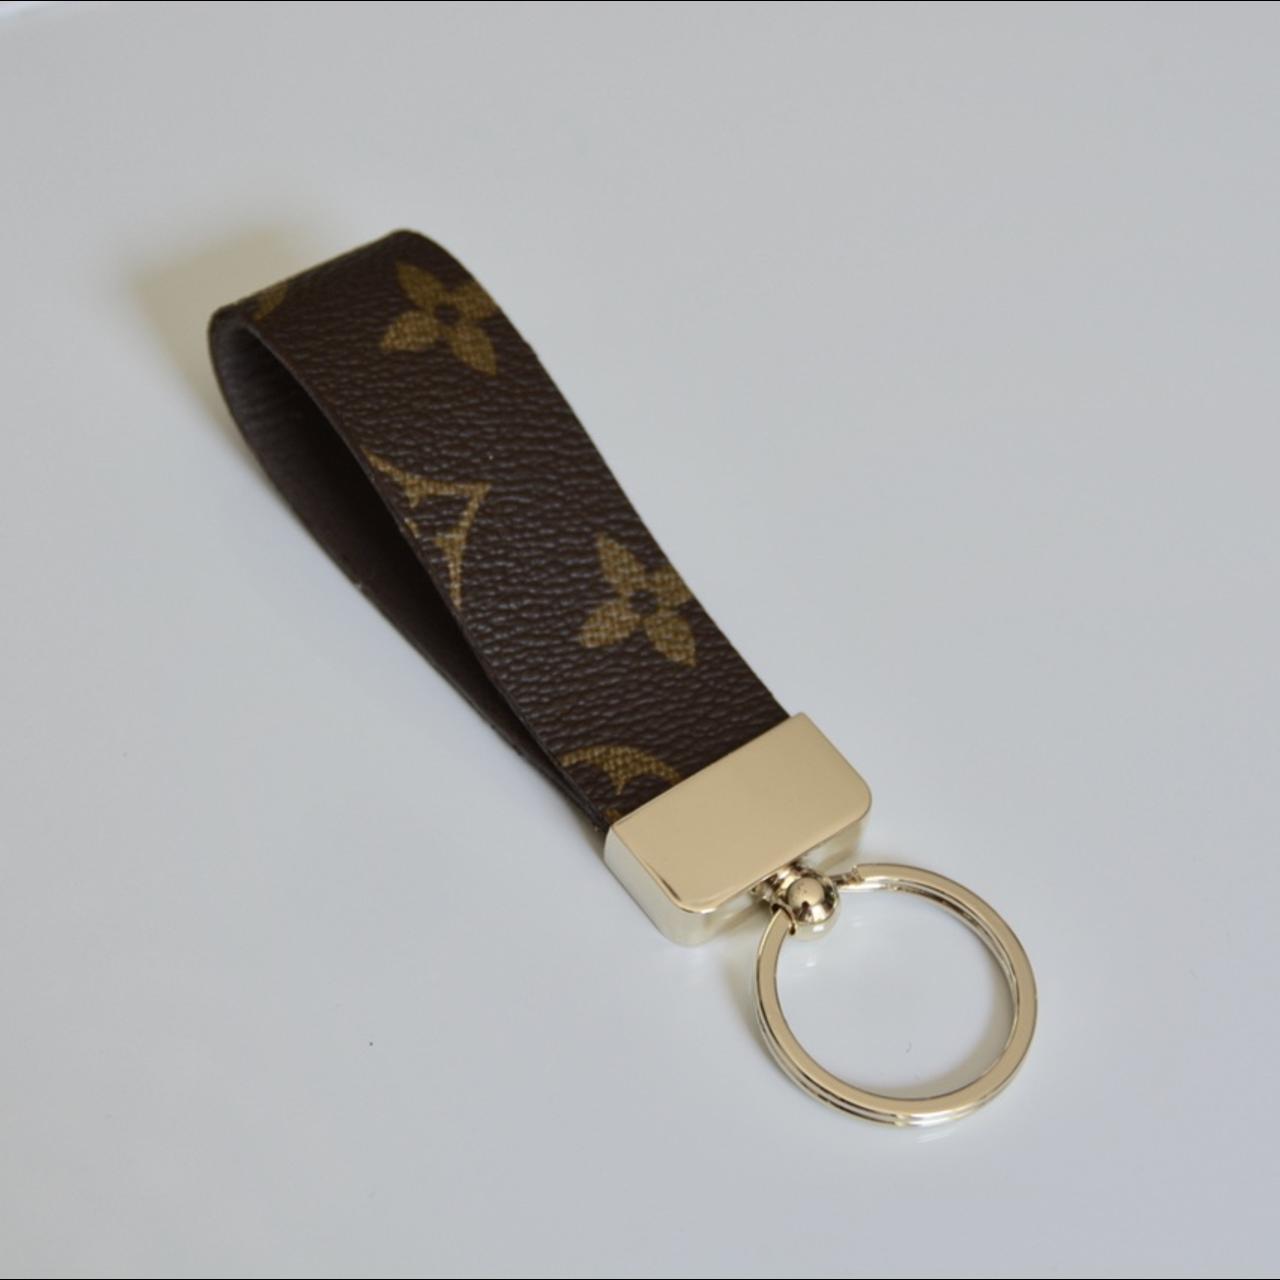 leather keychain louis vuittons